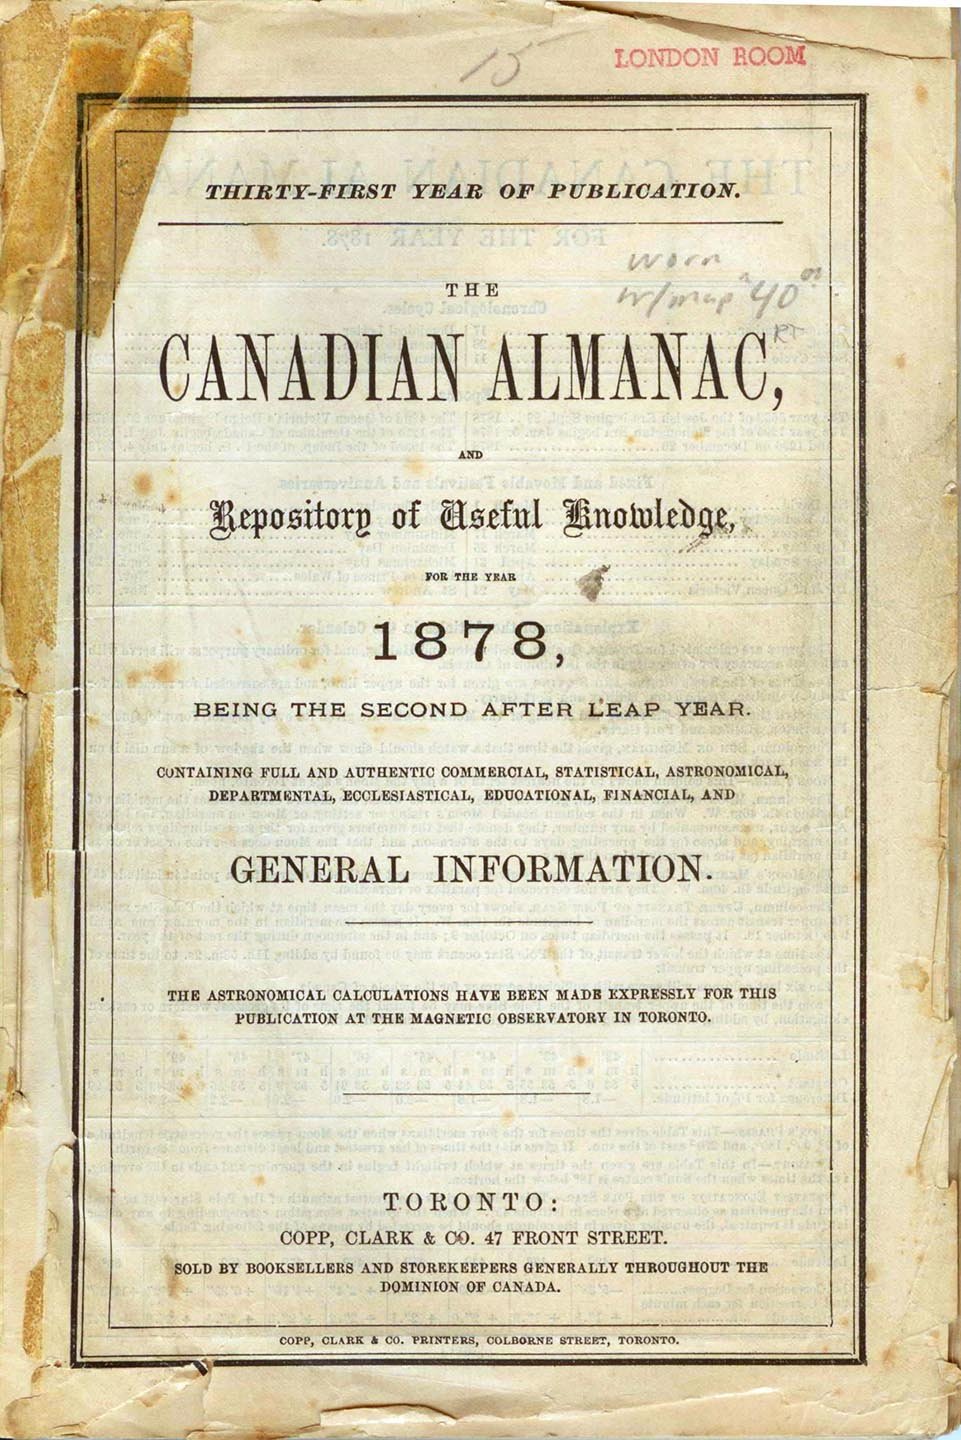 The Canadian Almanac, and Repository of Useful Knowledge for the Year 1878